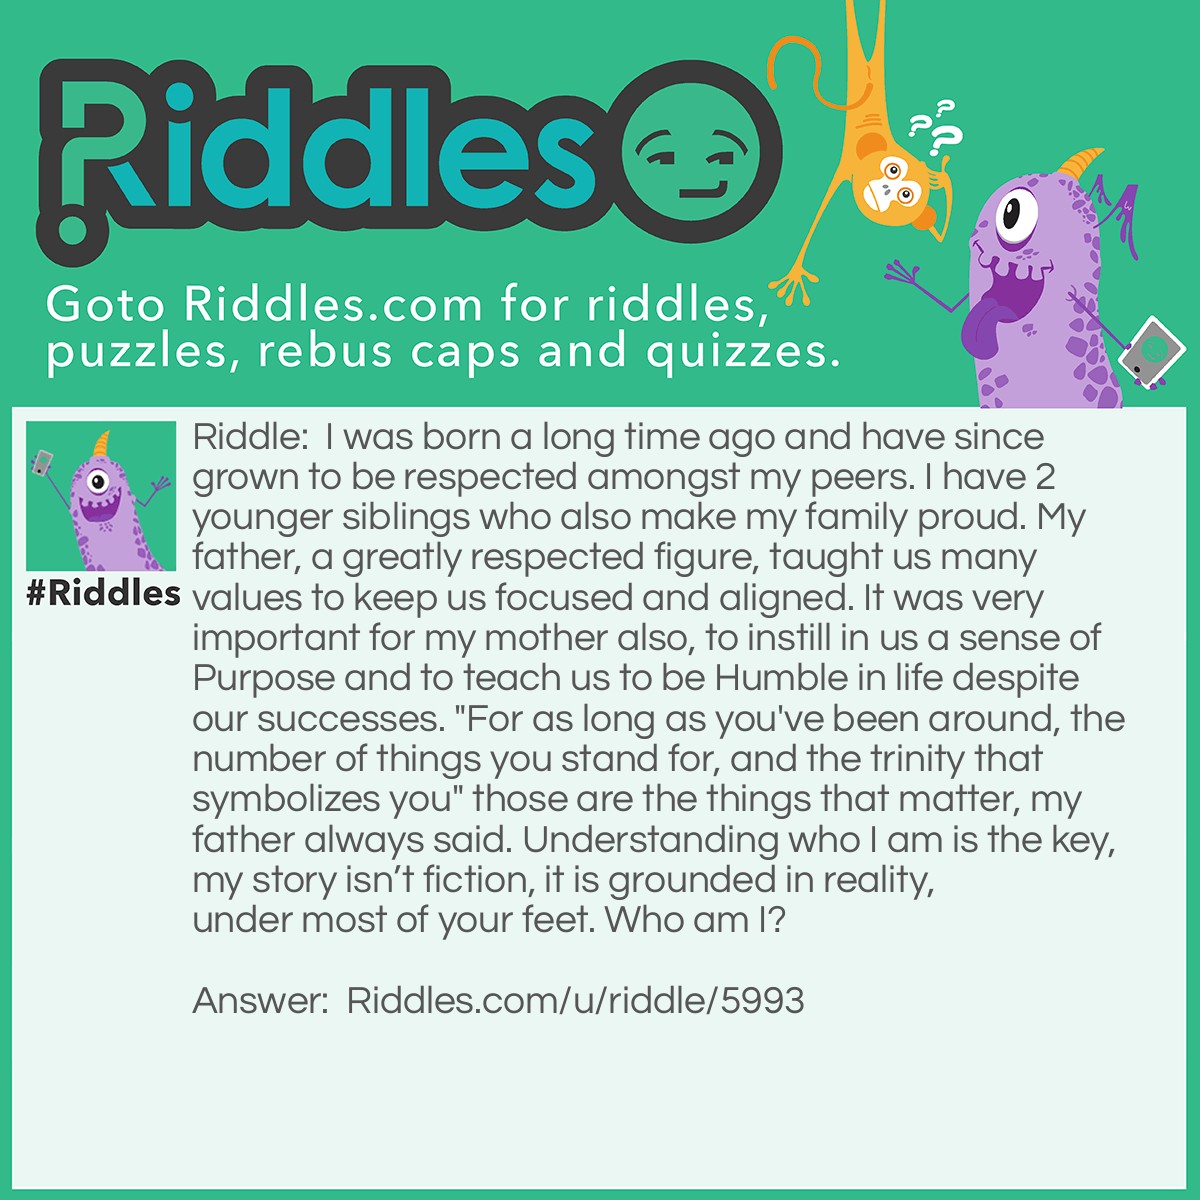 Riddle: I was born a long time ago and have since grown to be respected amongst my peers. I have 2 younger siblings who also make my family proud. My father, a greatly respected figure, taught us many values to keep us focused and aligned. It was very important for my mother also, to instill in us a sense of Purpose and to teach us to be Humble in life despite our successes. "For as long as you've been around, the number of things you stand for, and the trinity that symbolizes you" those are the things that matter, my father always said. Understanding who I am is the key, my story isn't fiction, it is grounded in reality, under most of your feet. Who am I? Answer: Need answer